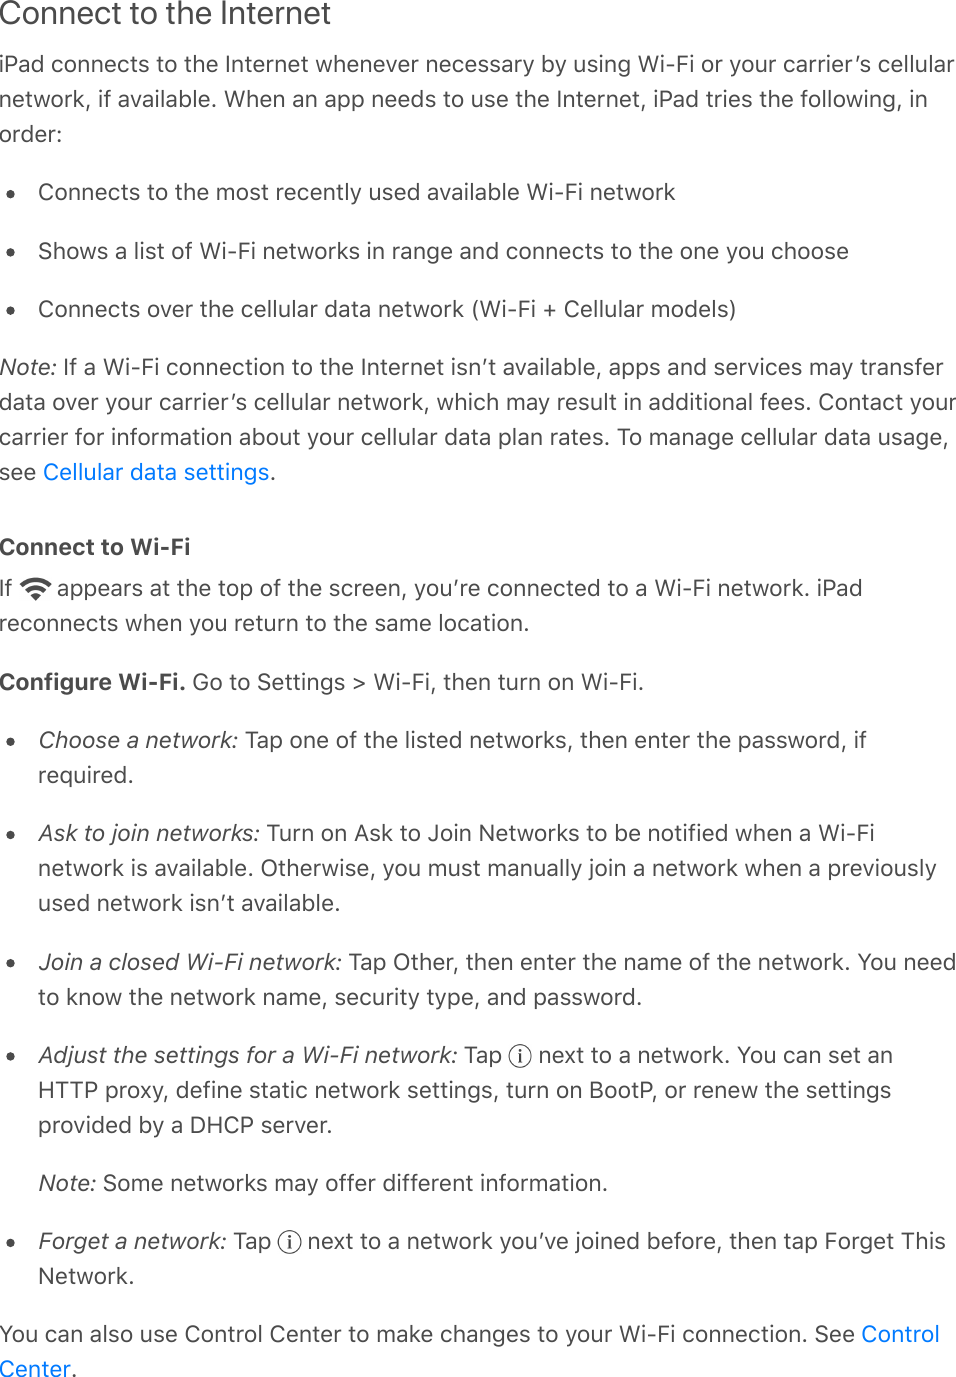 Connect to the InternetiPad connects to the Internet whenever necessary by using Wi-Fi or your carrierʼs cellularnetwork, if available. When an app needs to use the Internet, iPad tries the following, inorder:Connects to the most recently used available Wi-Fi networkShows a list of Wi-Fi networks in range and connects to the one you chooseConnects over the cellular data network (Wi-Fi + Cellular models)Note: If a Wi-Fi connection to the Internet isnʼt available, apps and services may transferdata over your carrierʼs cellular network, which may result in additional fees. Contact yourcarrier for information about your cellular data plan rates. To manage cellular data usage,see  .Connect to Wi-FiIf   appears at the top of the screen, youʼre connected to a Wi-Fi network. iPadreconnects when you return to the same location.Configure Wi-Fi. Go to Settings &gt; Wi-Fi, then turn on Wi-Fi.Choose a network: Tap one of the listed networks, then enter the password, ifrequired.Ask to join networks: Turn on Ask to Join Networks to be notified when a Wi-Finetwork is available. Otherwise, you must manually join a network when a previouslyused network isnʼt available.Join a closed Wi-Fi network: Tap Other, then enter the name of the network. You needto know the network name, security type, and password.Adjust the settings for a Wi-Fi network: Tap   next to a network. You can set anHTTP proxy, define static network settings, turn on BootP, or renew the settingsprovided by a DHCP server.Note: Some networks may offer different information.Forget a network: Tap   next to a network youʼve joined before, then tap Forget ThisNetwork.You can also use Control Center to make changes to your Wi-Fi connection. See .Cellular data settingsControlCenter